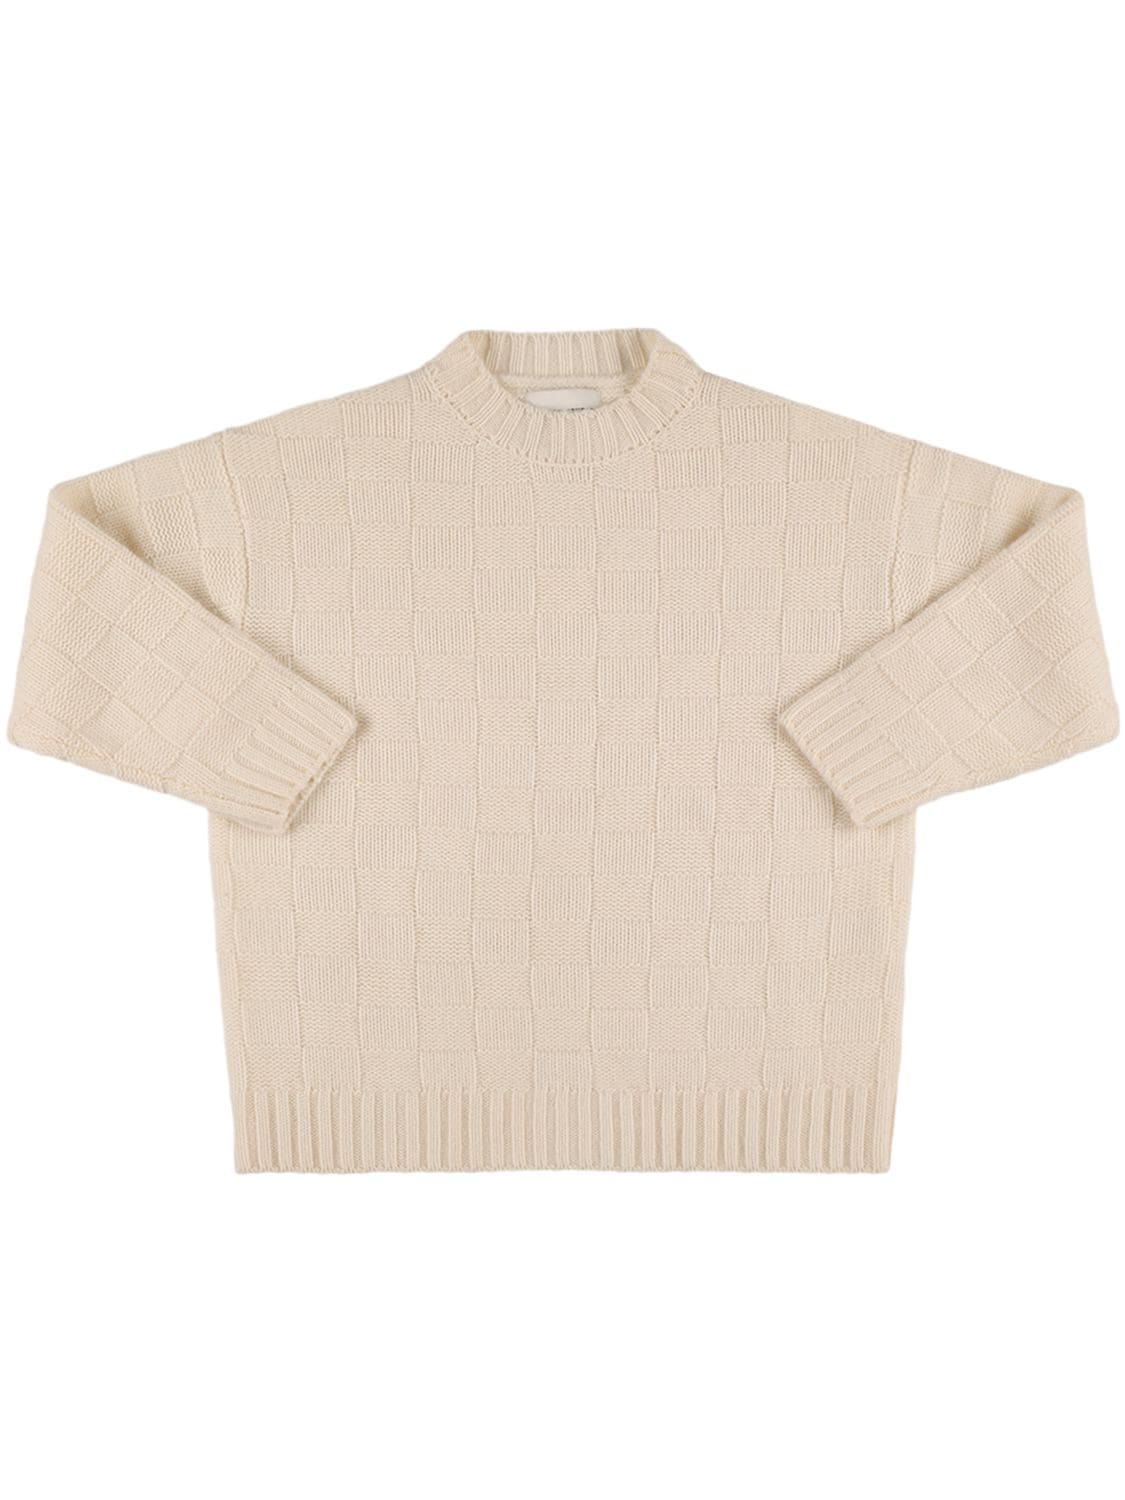 Loulou Studio Kids' Cashmere Sweater In Ivory